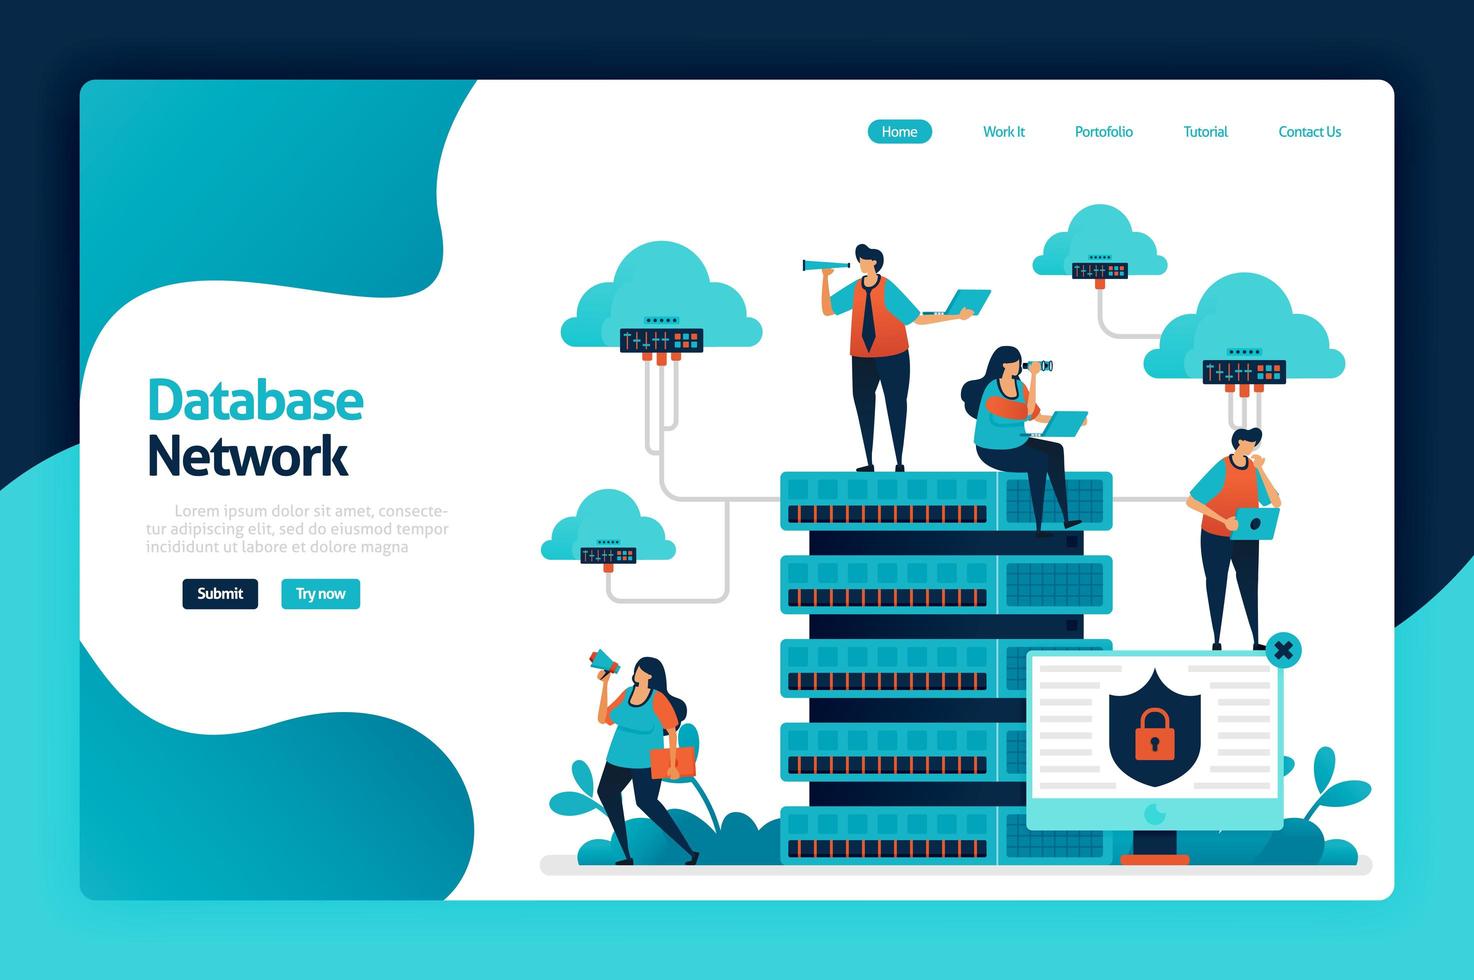 Database network landing page design. data network from cloud, server and hosting to data center. data protection and security technology. vector illustration for poster, website, flyer, mobile app